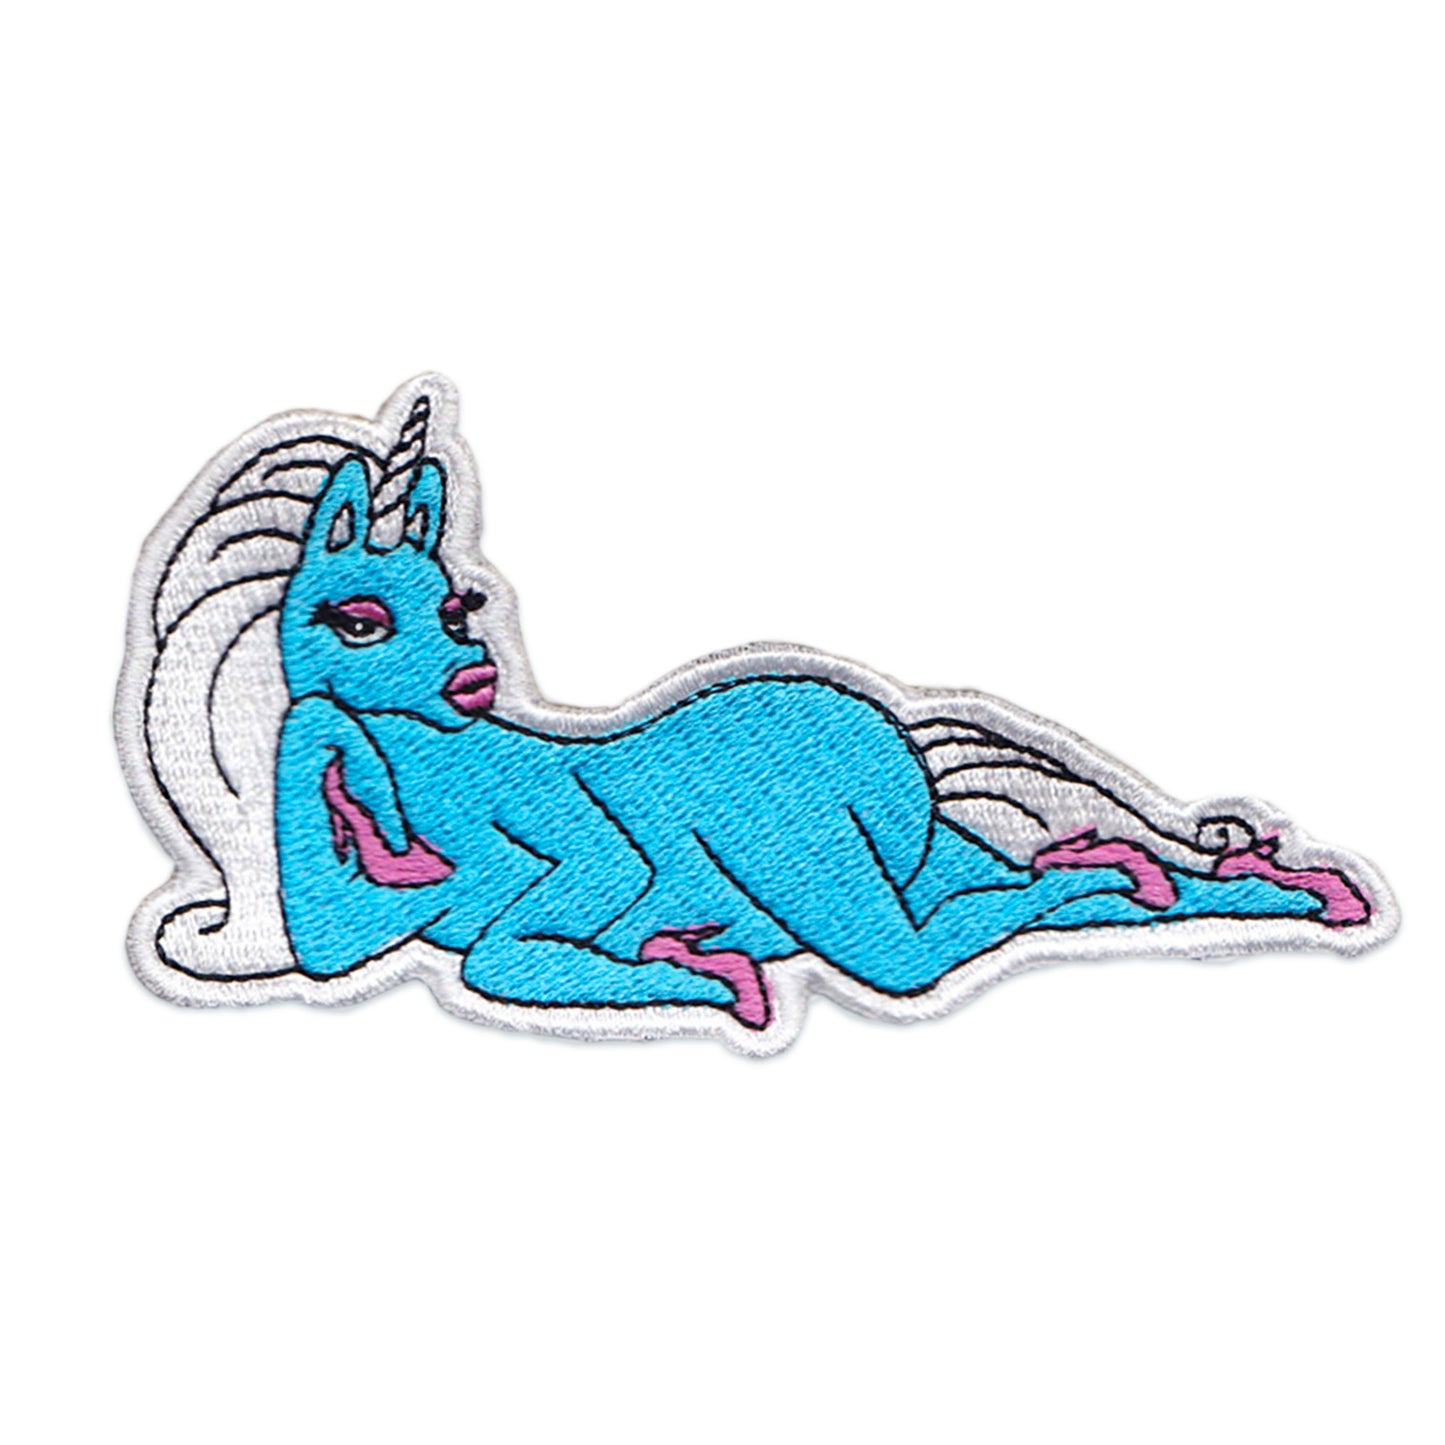 blue unicorn patch with heels